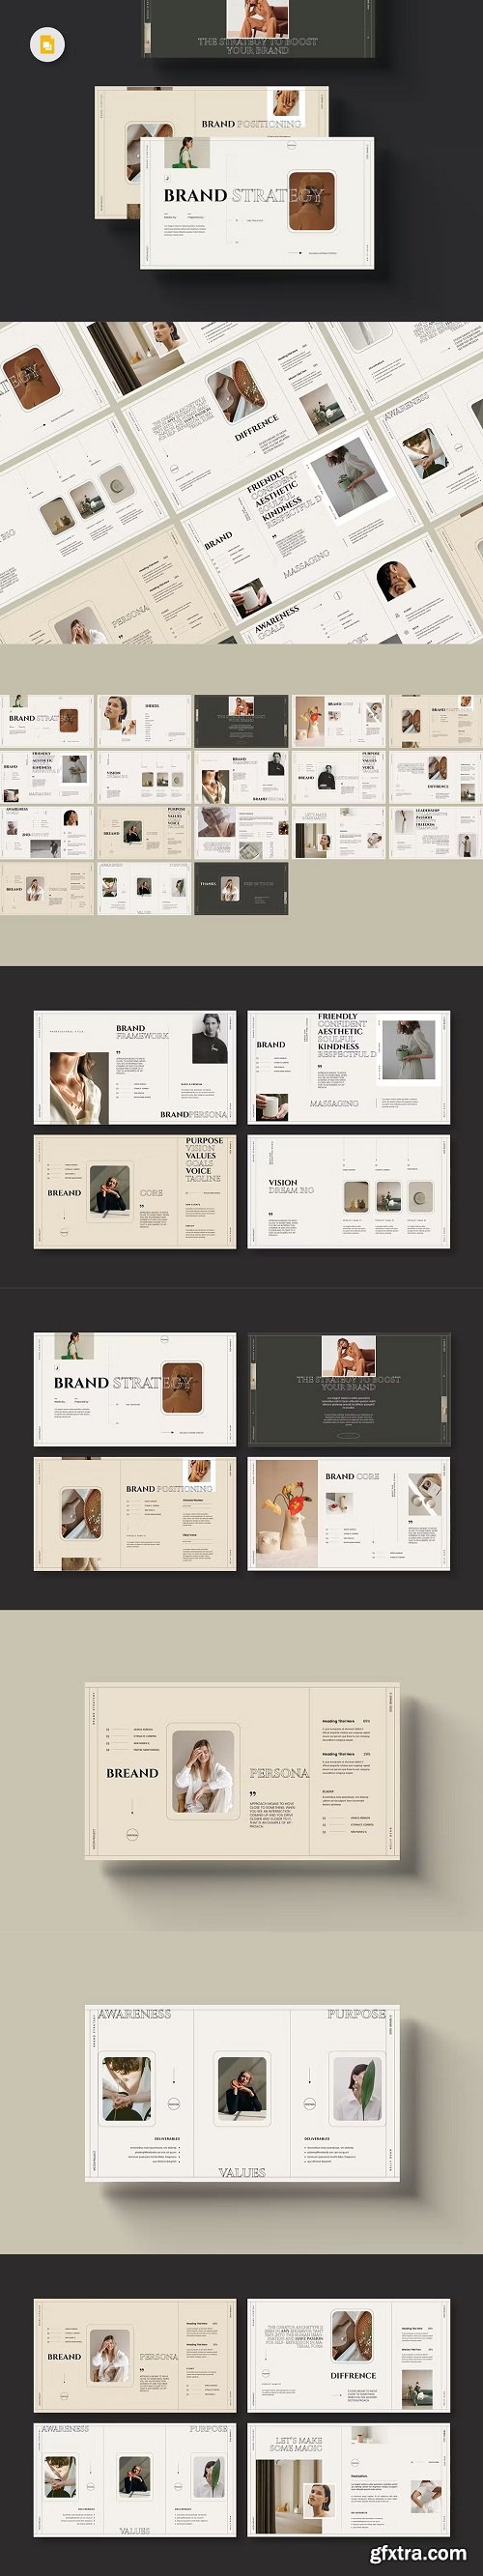 Brand Strategy Guide Template LS3XLXK